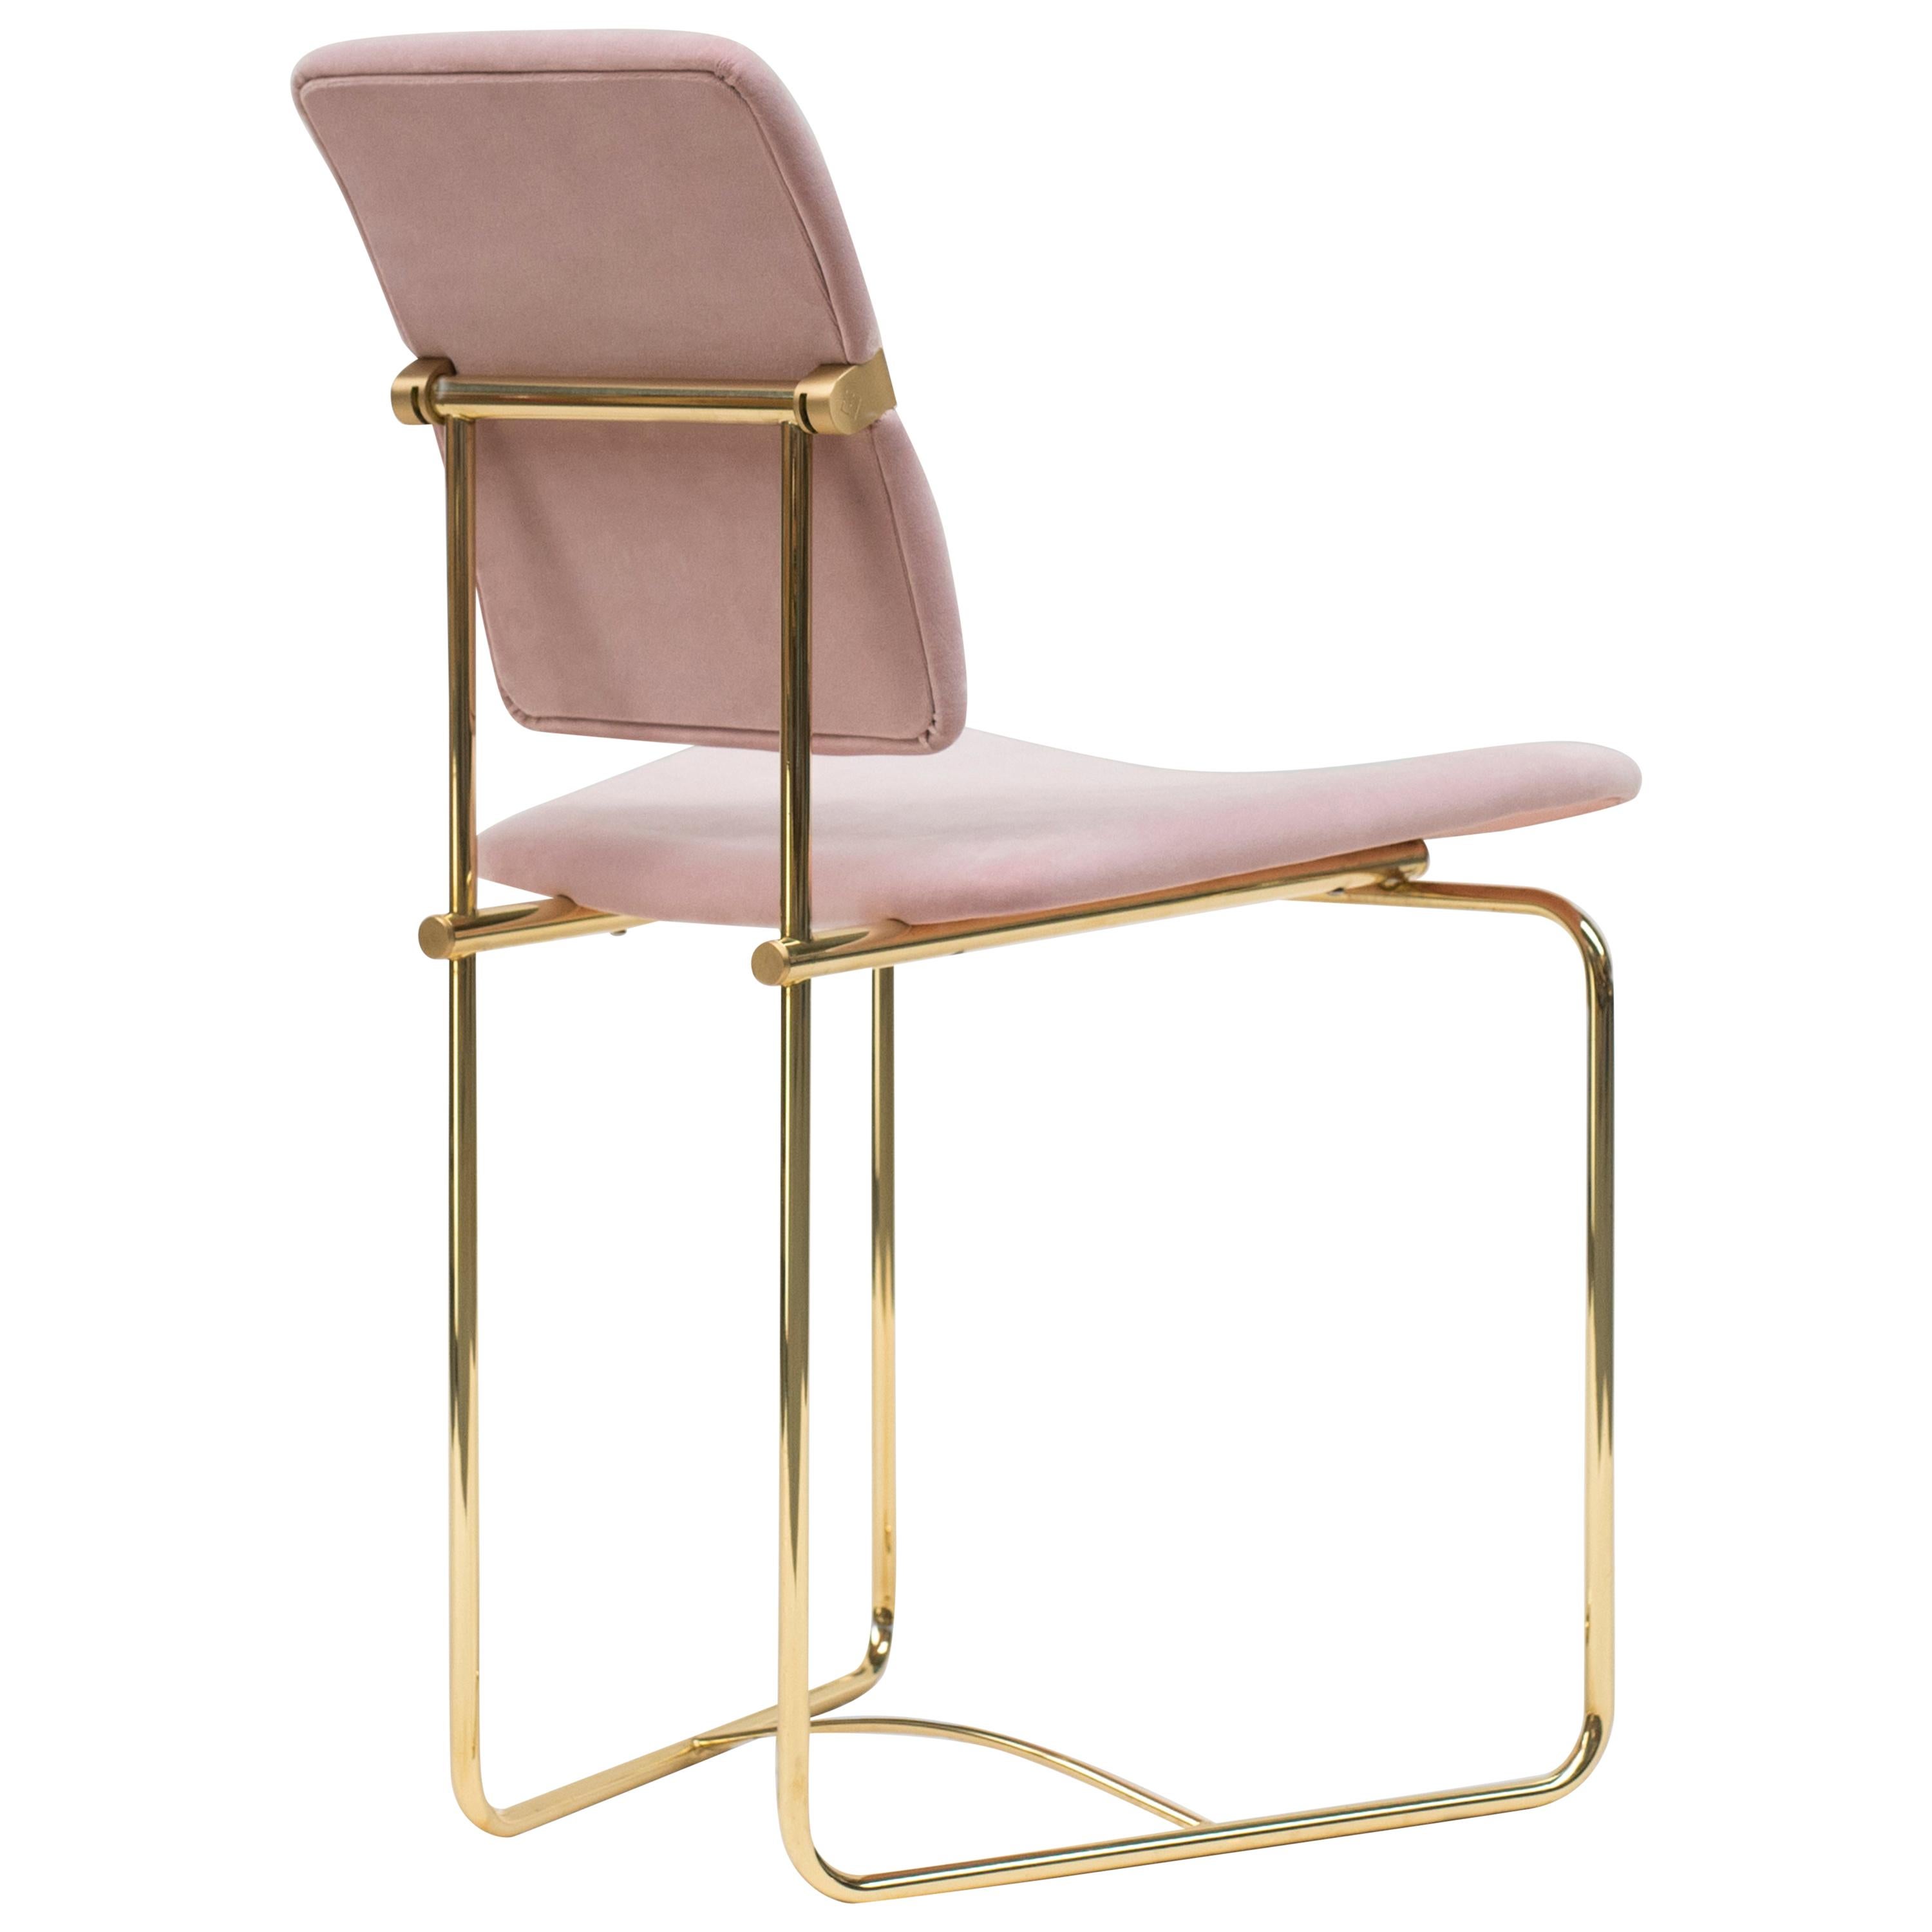 Peter Ghyczy Chair Urban ‘S02’ Brass Gloss / Pink Fabric